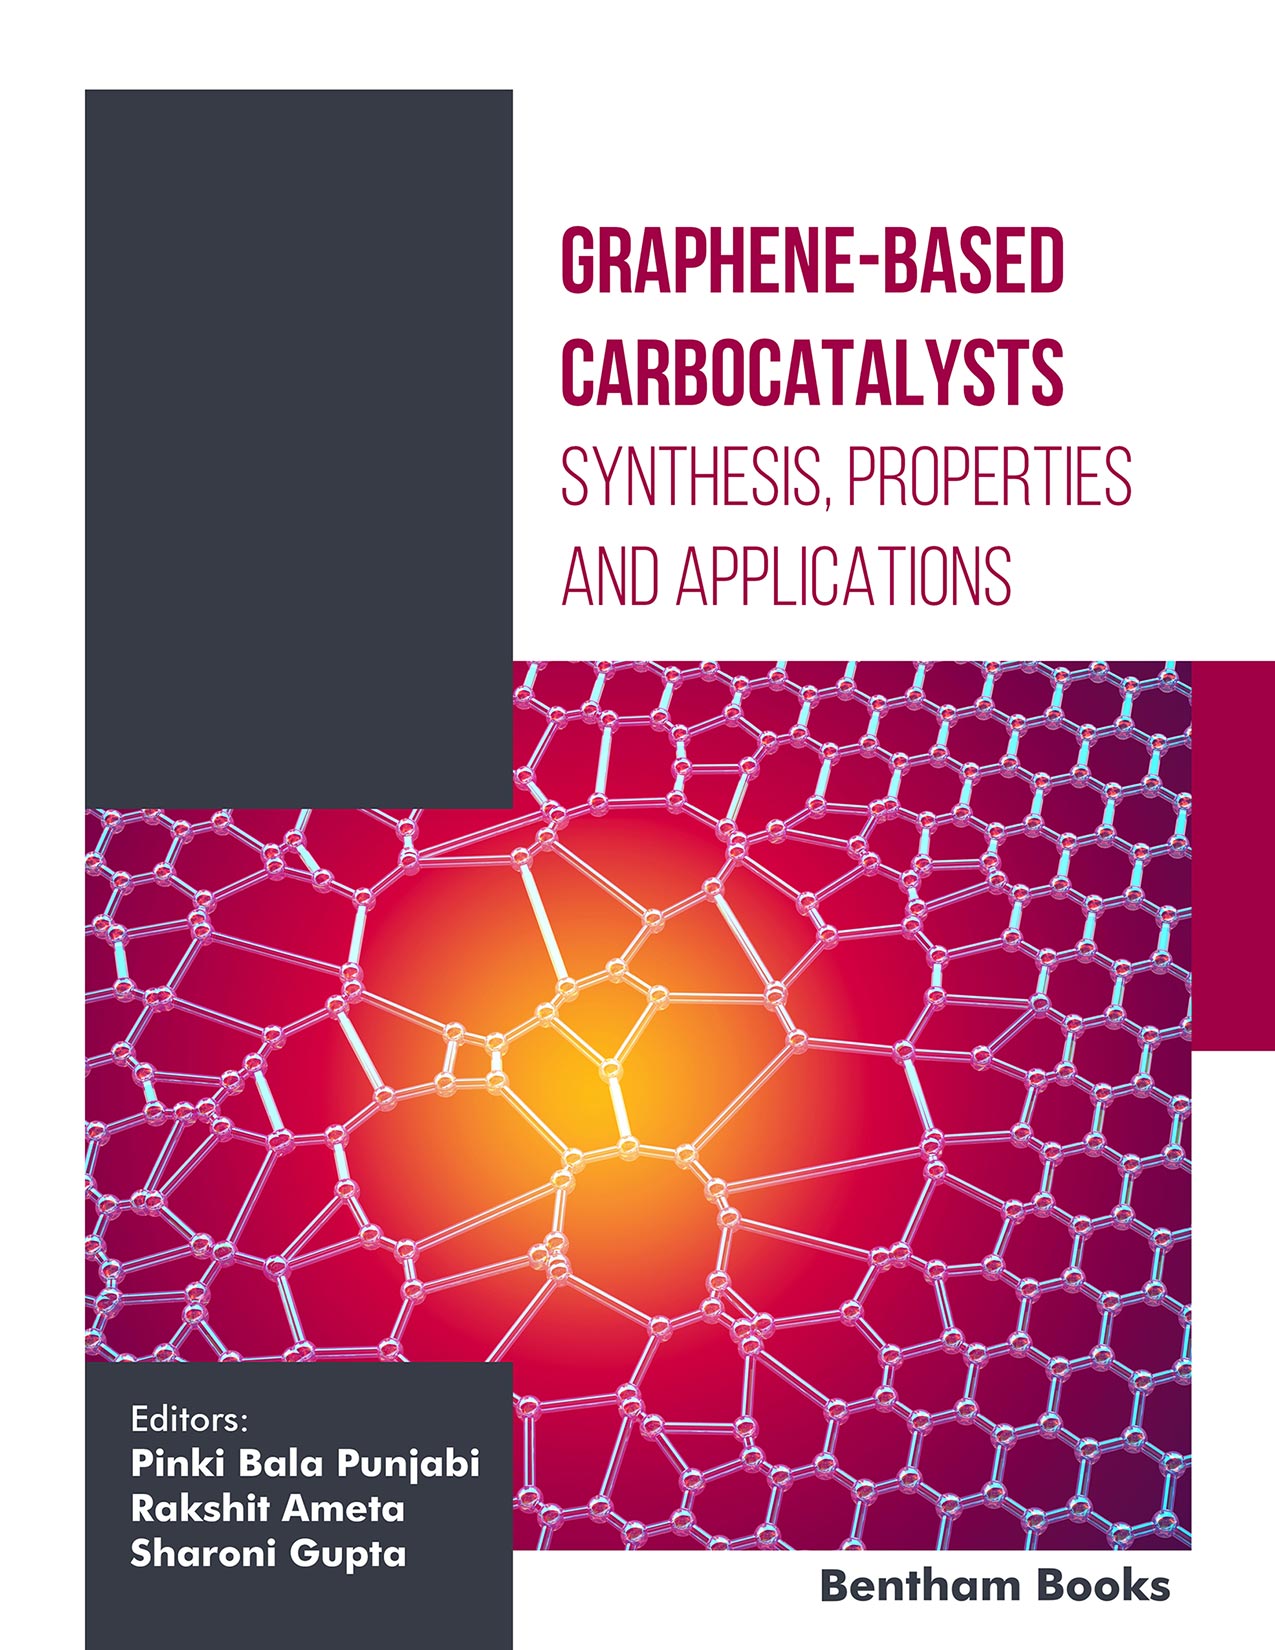 Graphene-based Carbocatalysis: Synthesis, Properties and Applications